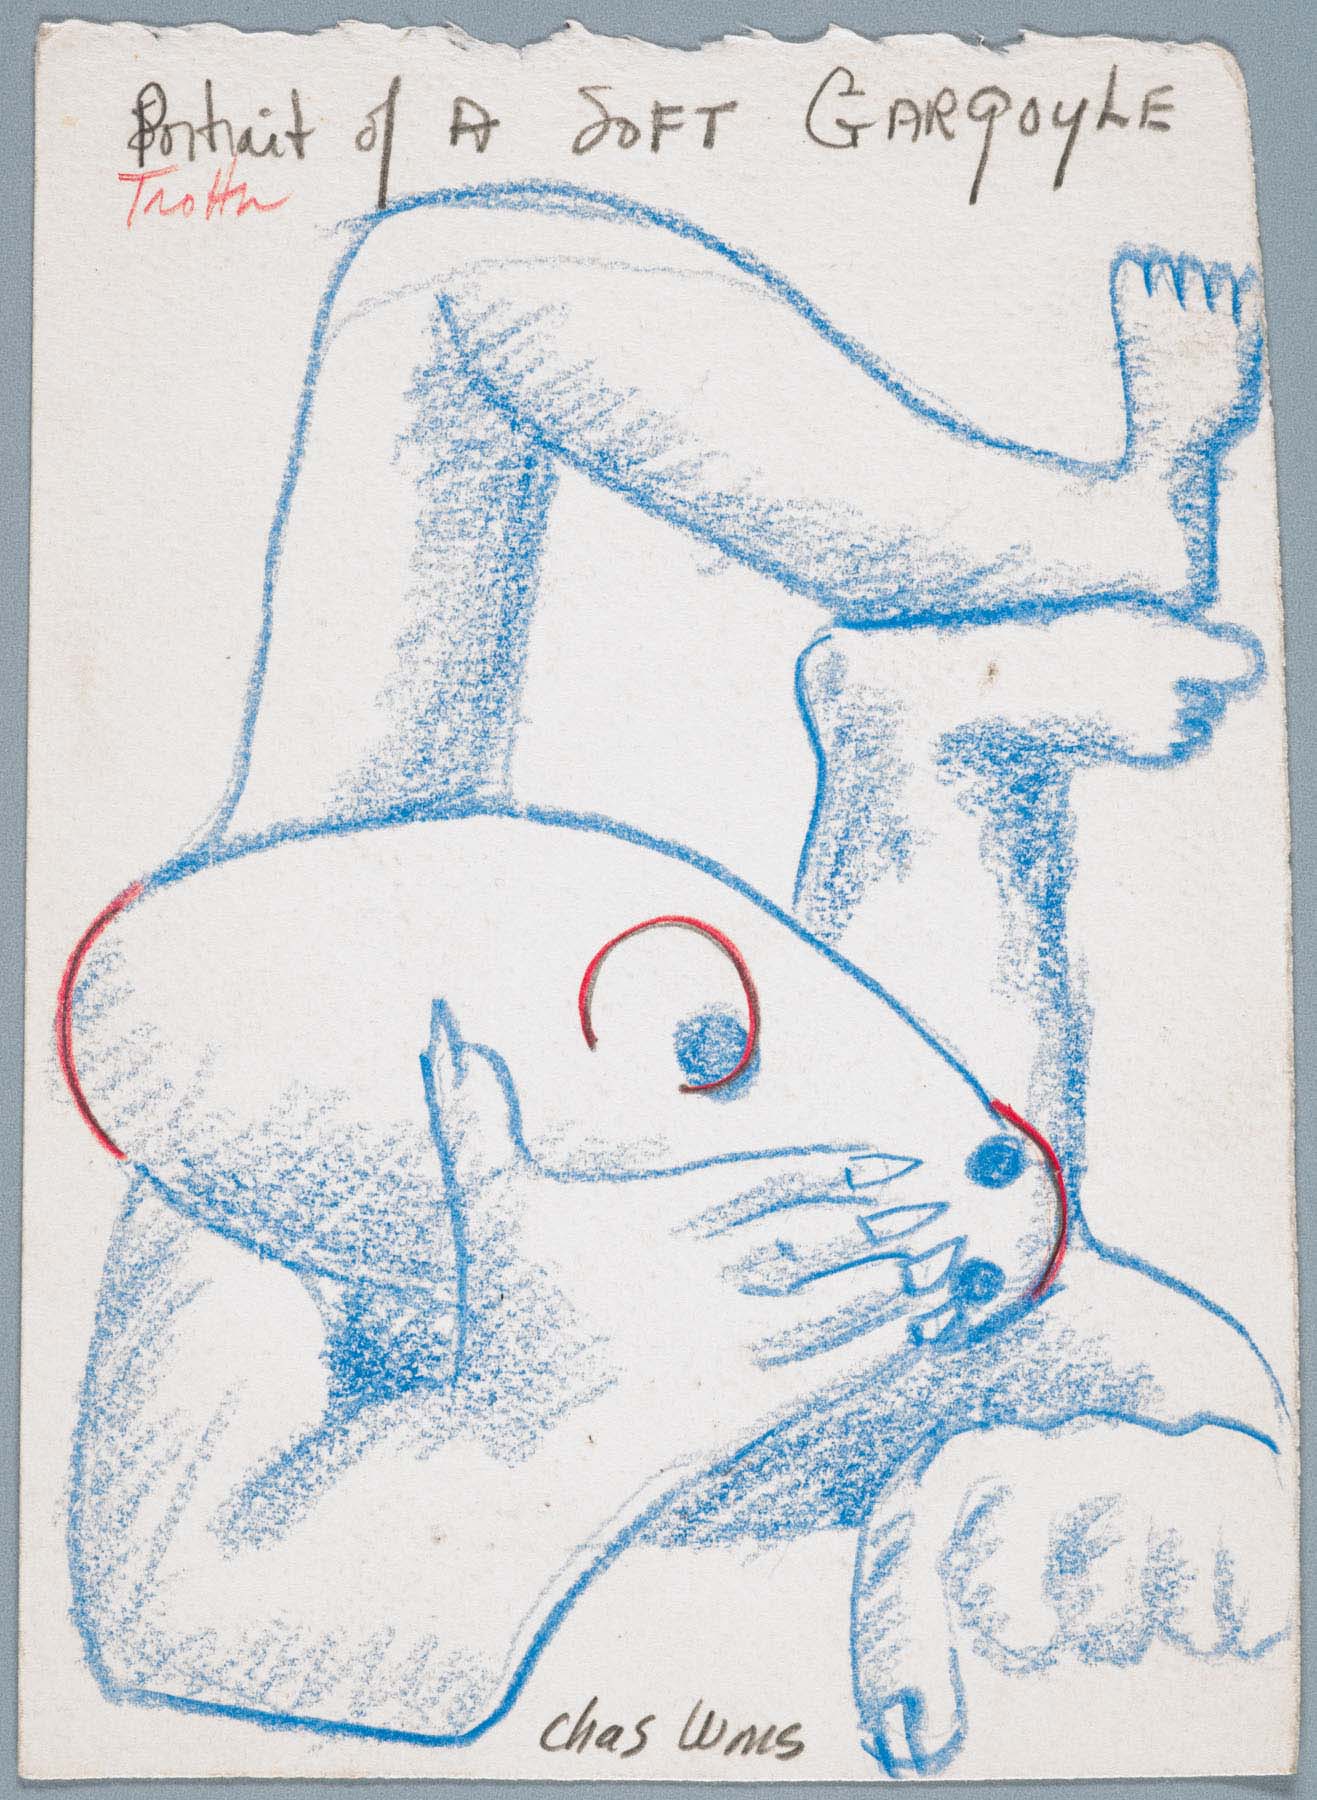 Drawing of a blue human-like figure laying with its legs in the air and its head in its hand with the words “Portrait of a soft gargoyle” at the top.